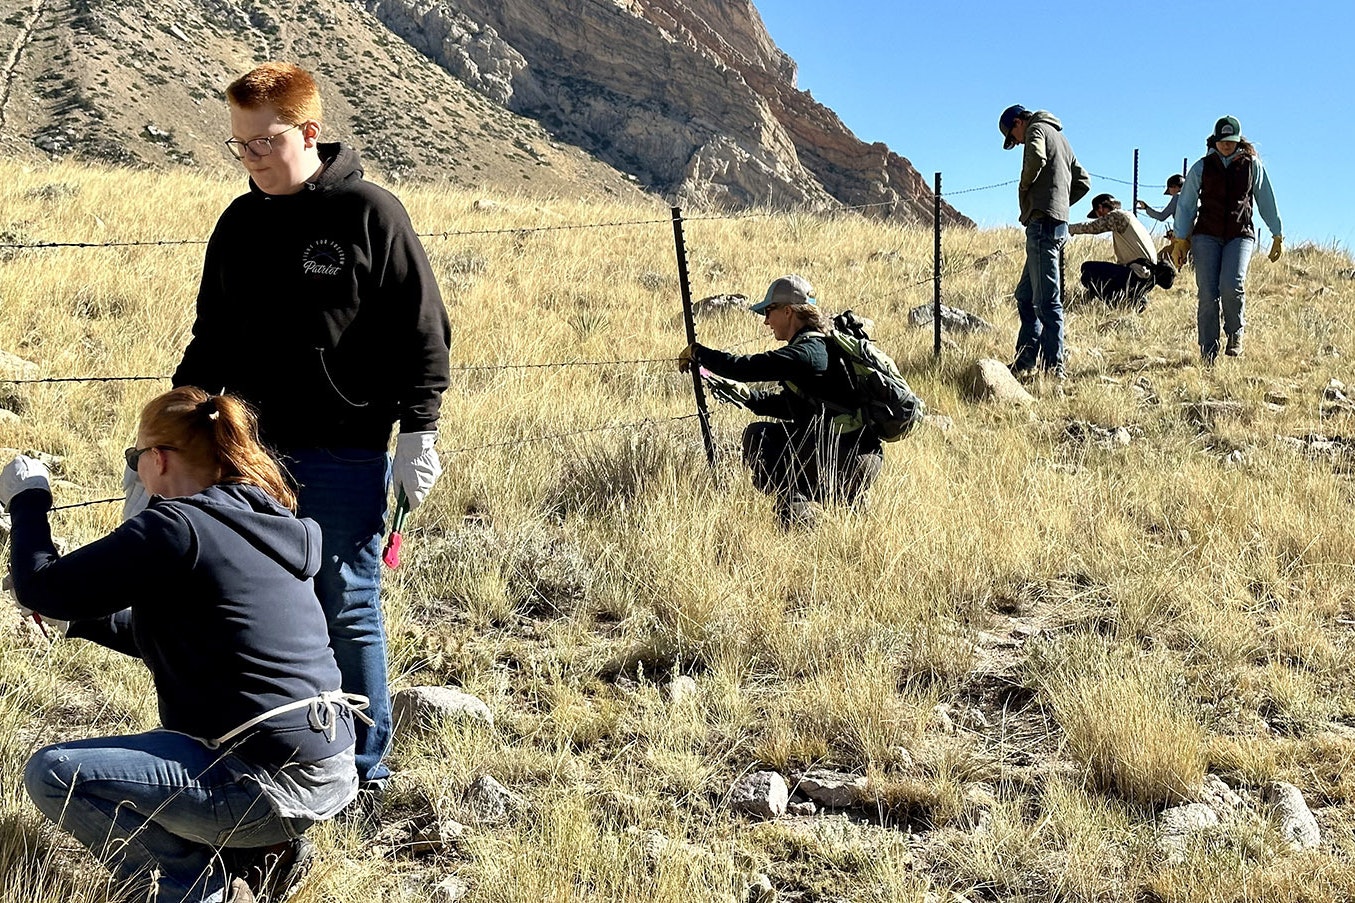 Volunteers of all ages in the Clarks Fork Canyon. Since the Absaroka Fence Initiative started in 2020, over 25 miles of fencing in Park County has been removed or modified. Over 2,000 volunteer hours have been donated to make this progress possible.